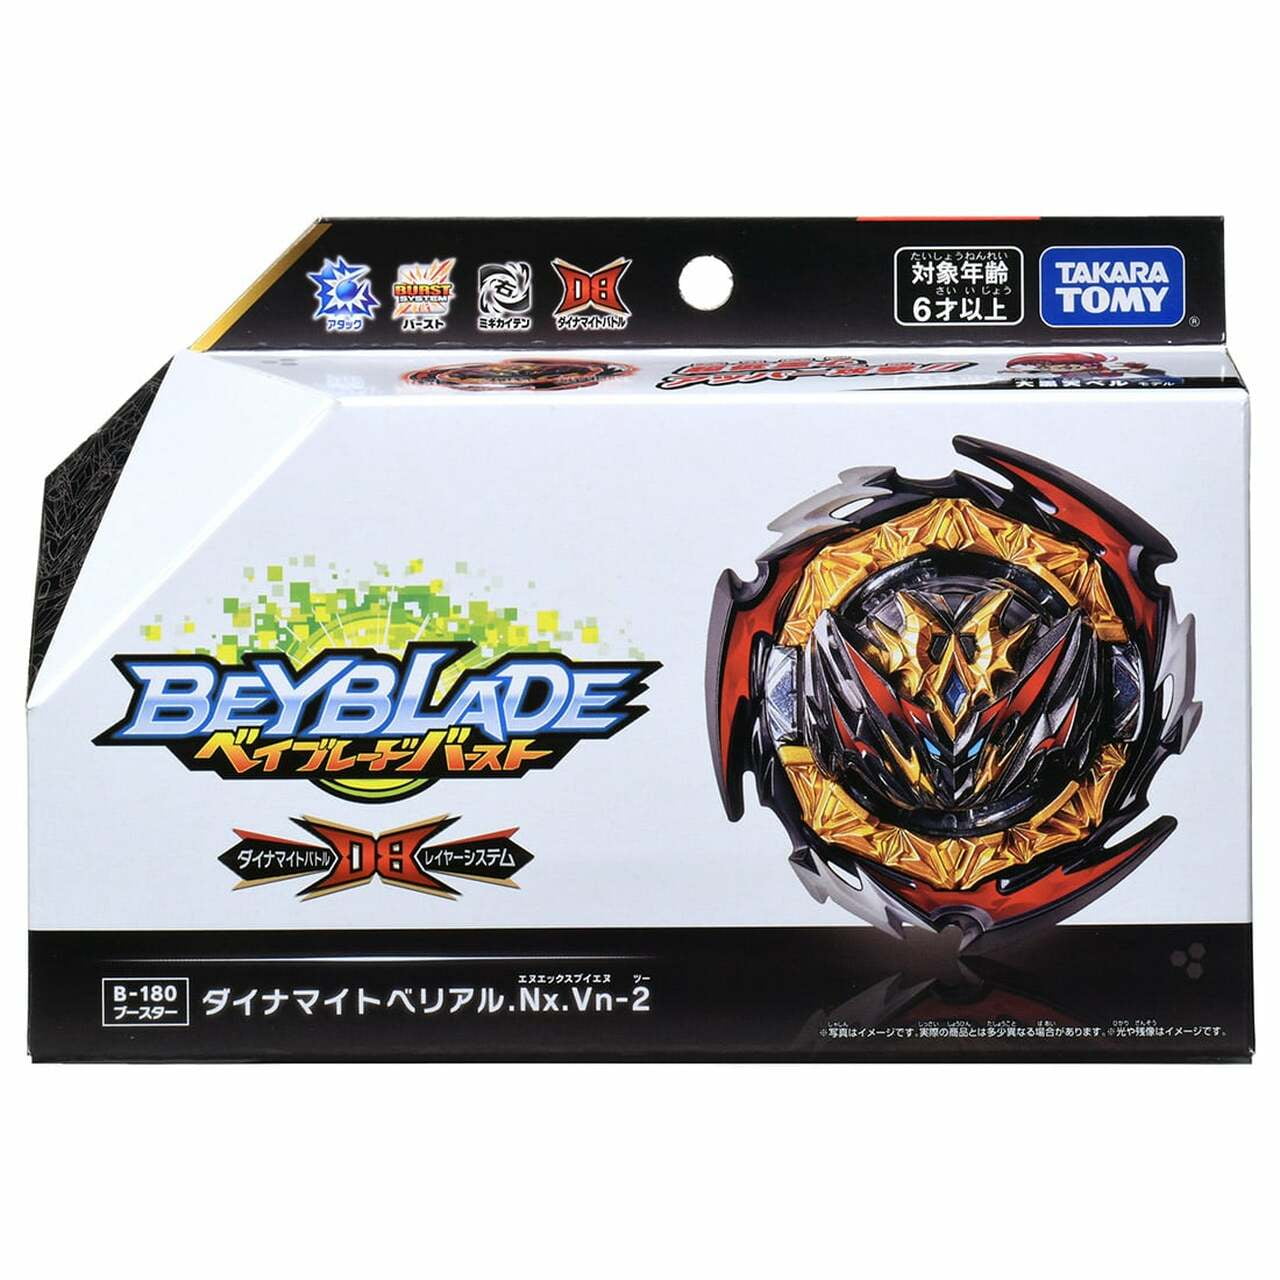 Grip B00 Launcher Beyblade Burst Booster B-00 Colo limited double God Bay Toy 